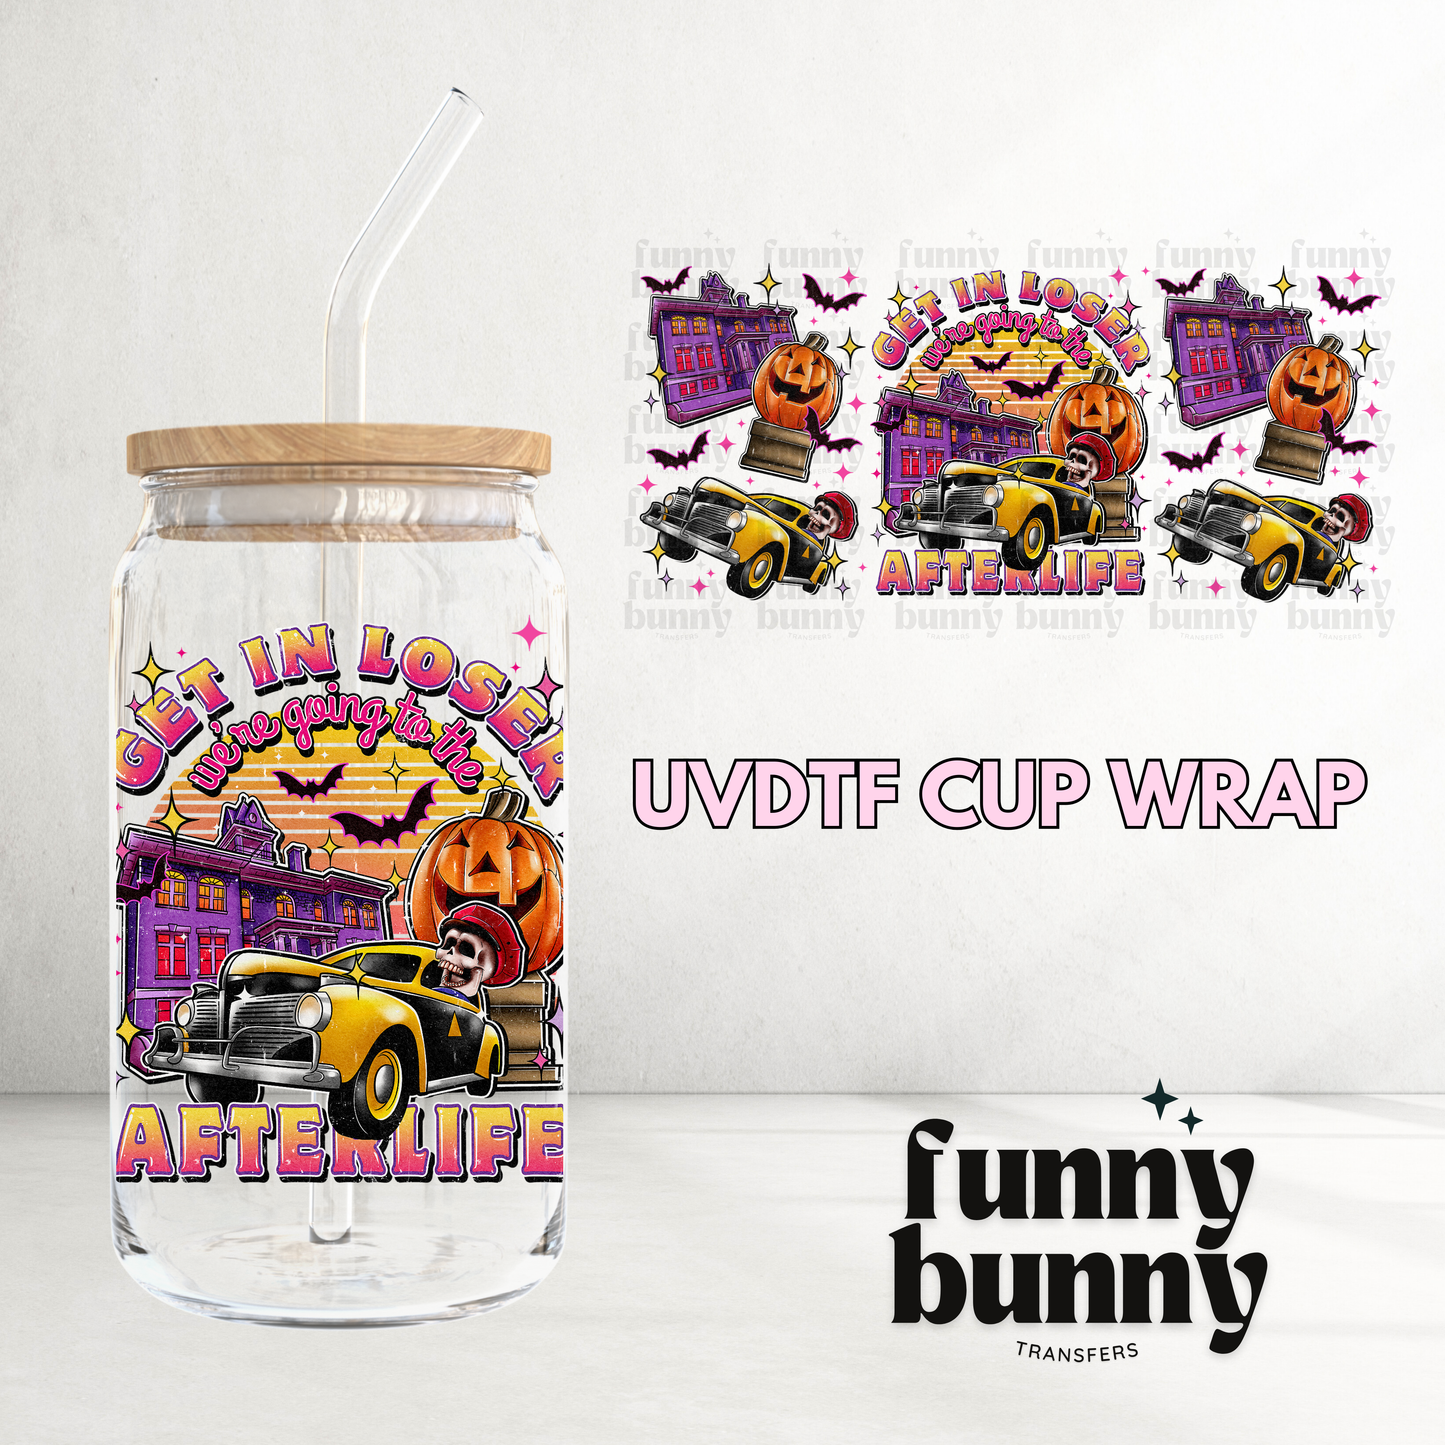 Afterlife - 16oz UVDTF Cup Wrap